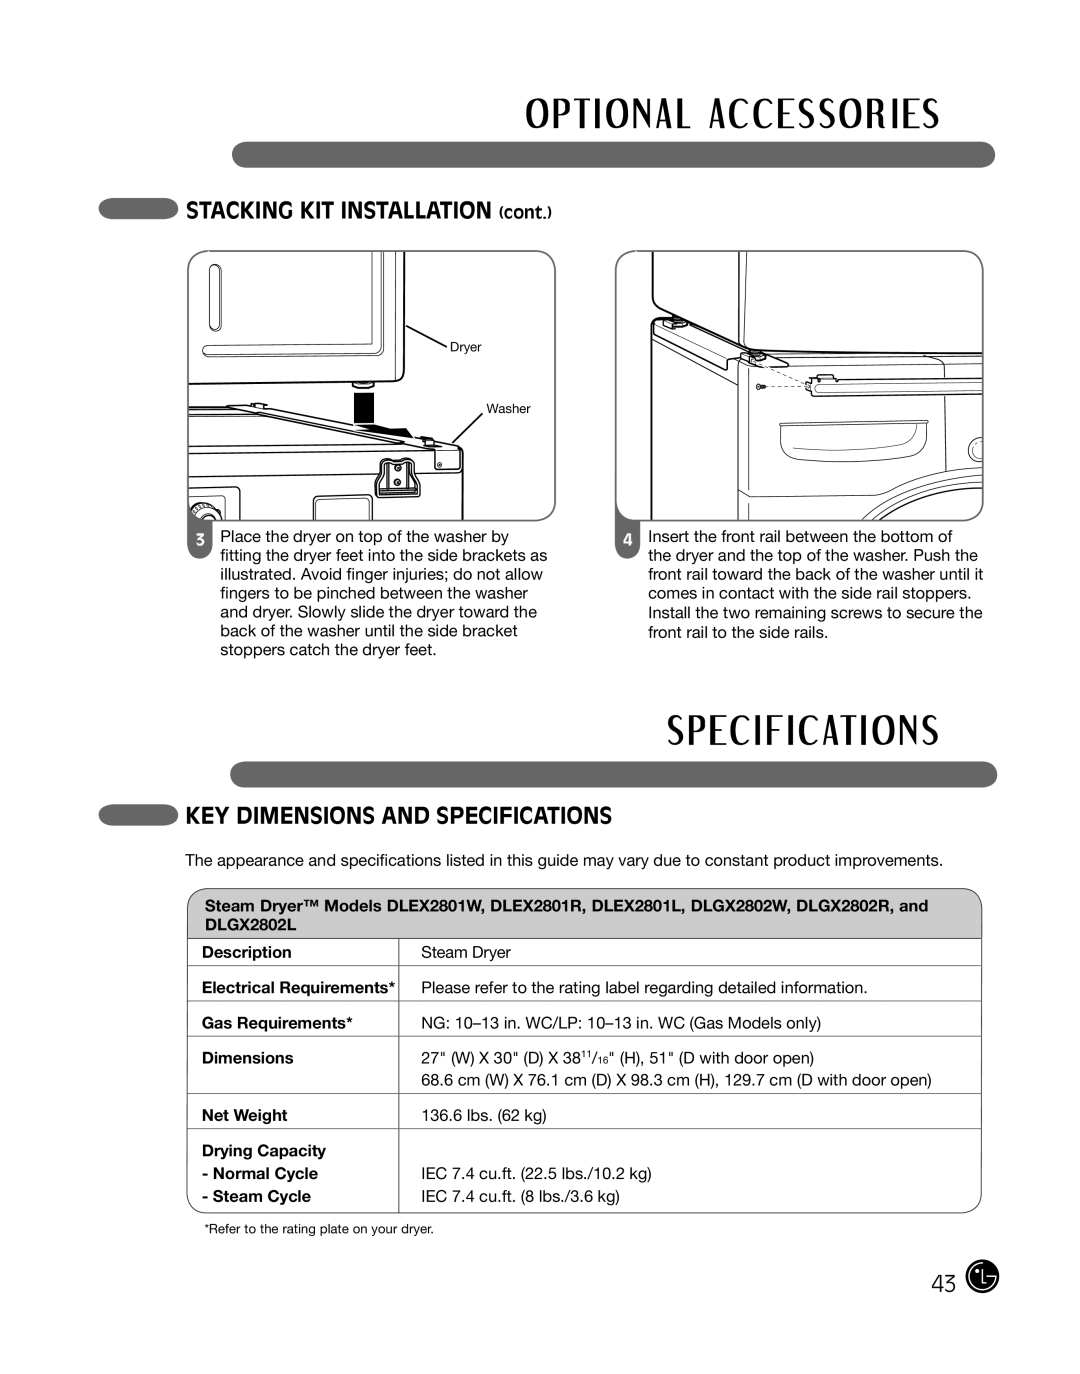 LG Electronics P154 manual STACKING KIT INSTALLATION cont, Key Dimensions And Specifications, Description, Gas Requirements 